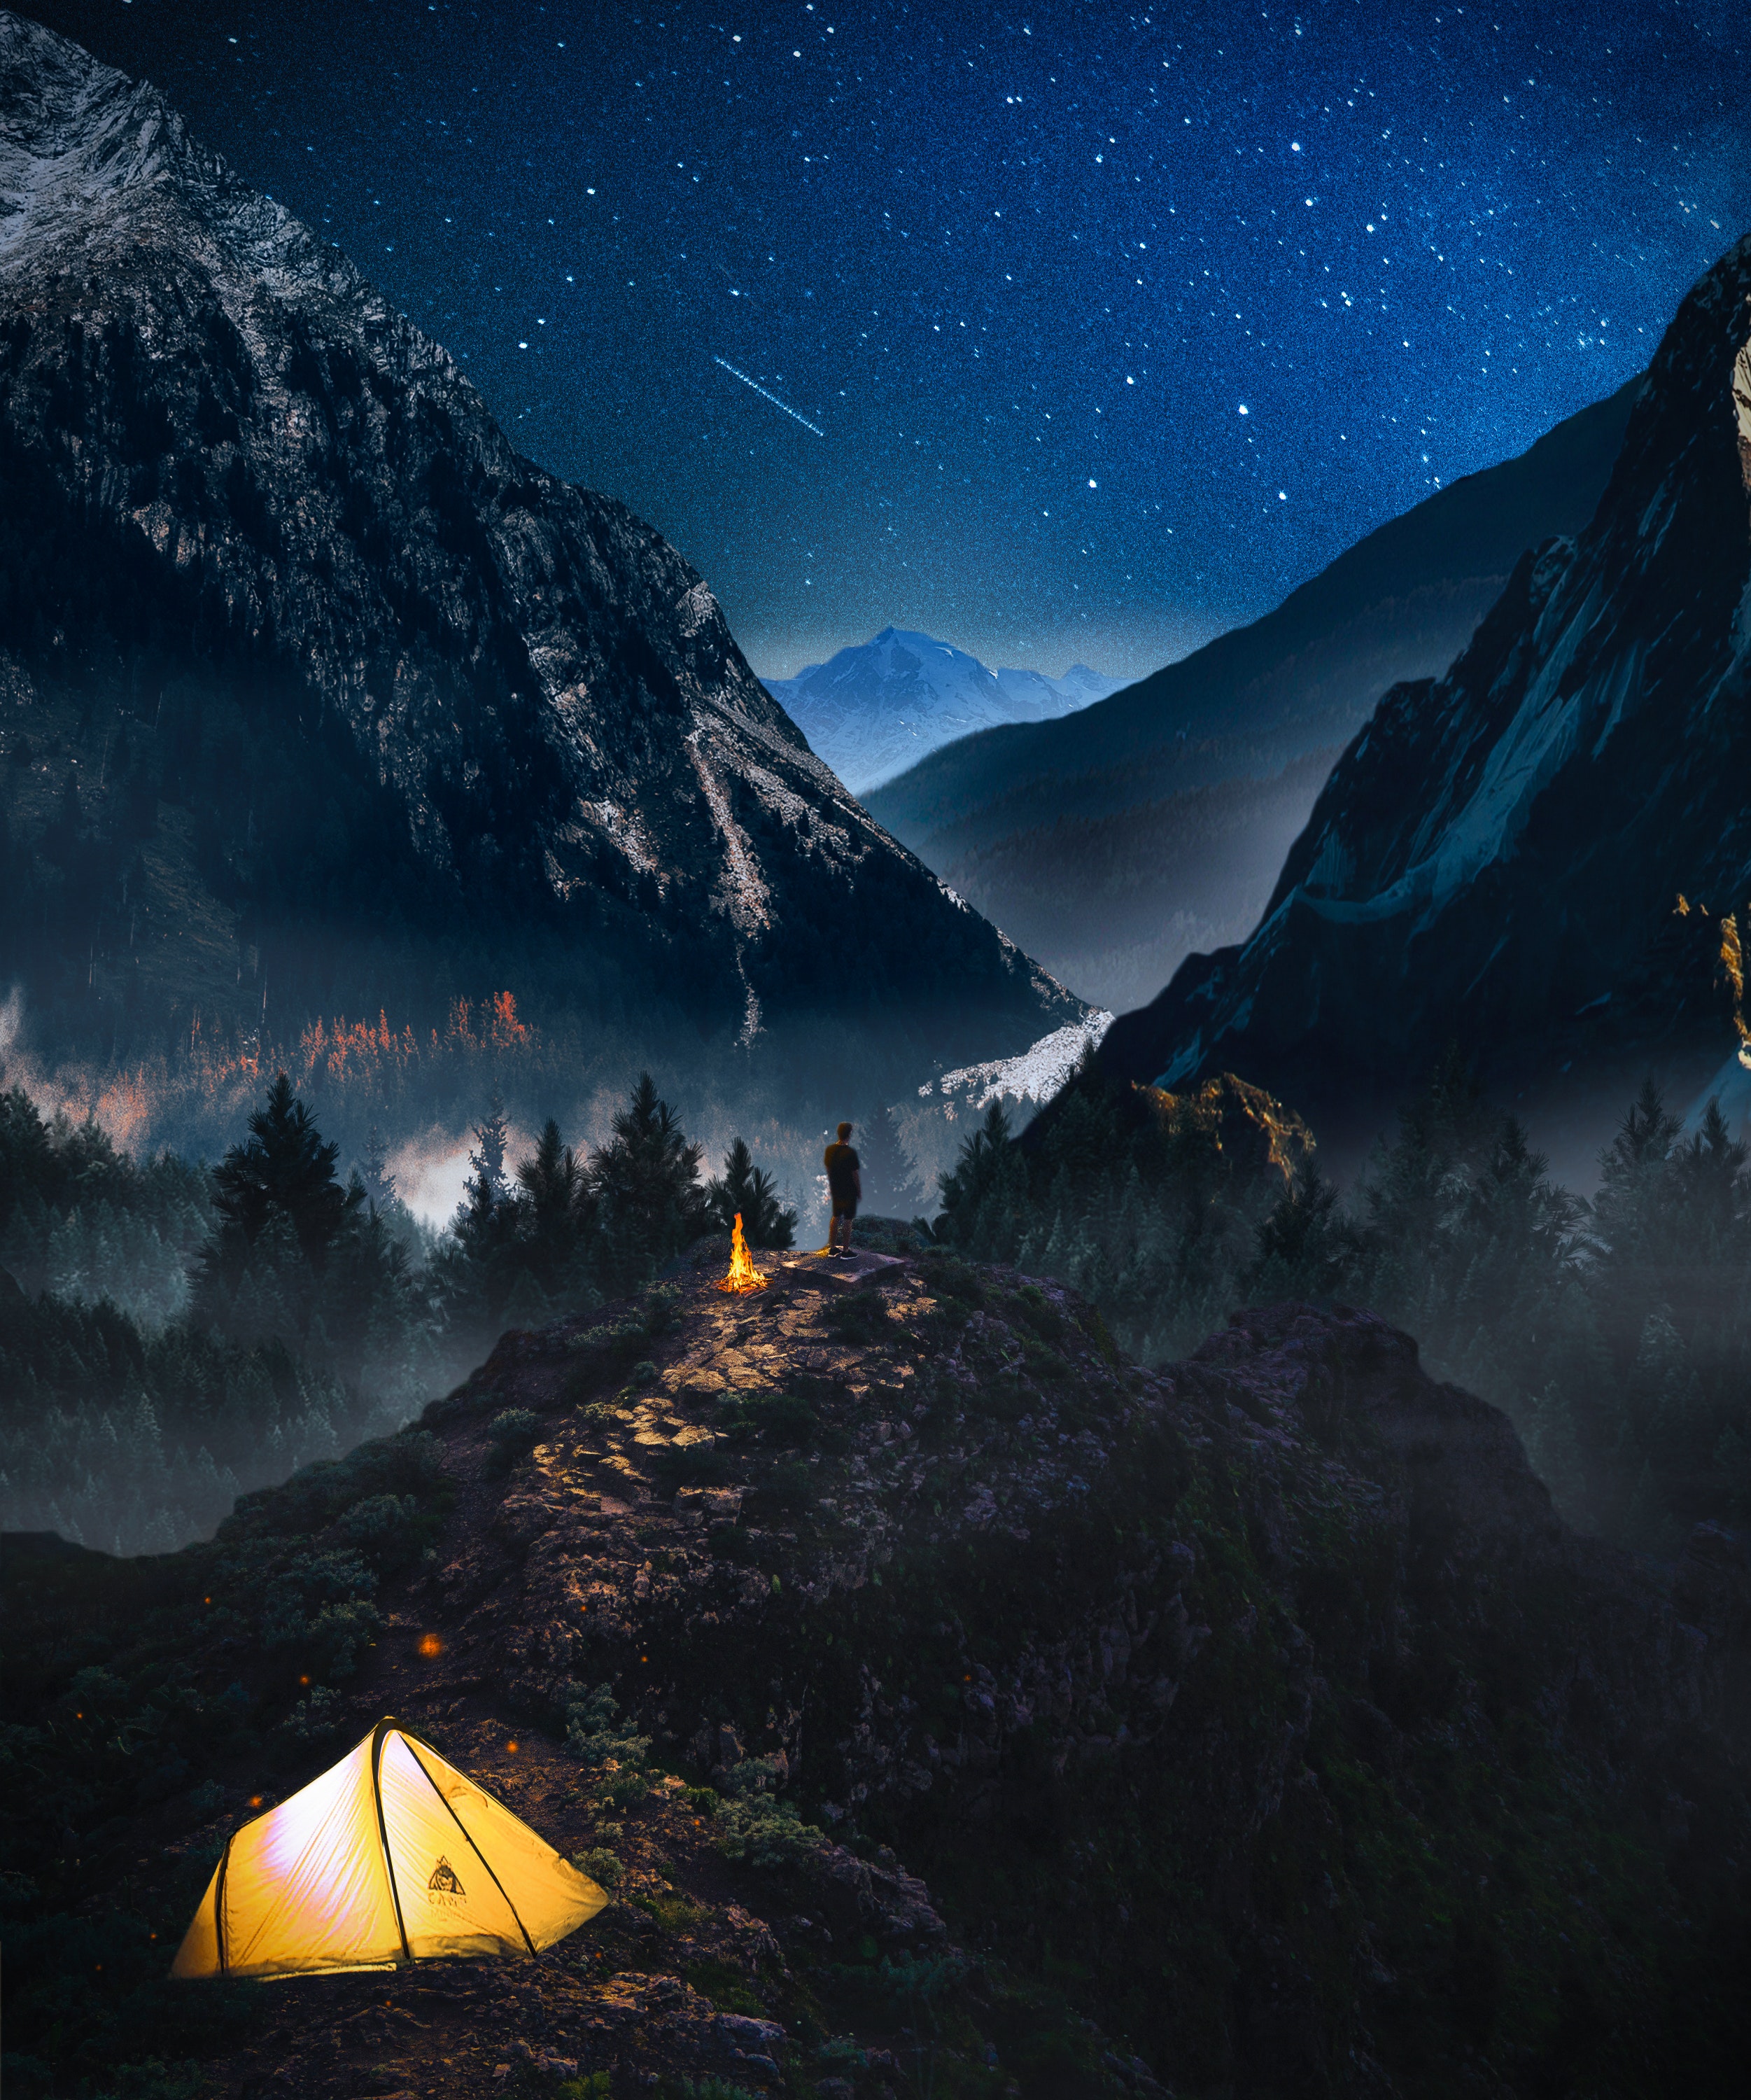 starry sky, loneliness, camping, photoshop, campsite, mountains, nature